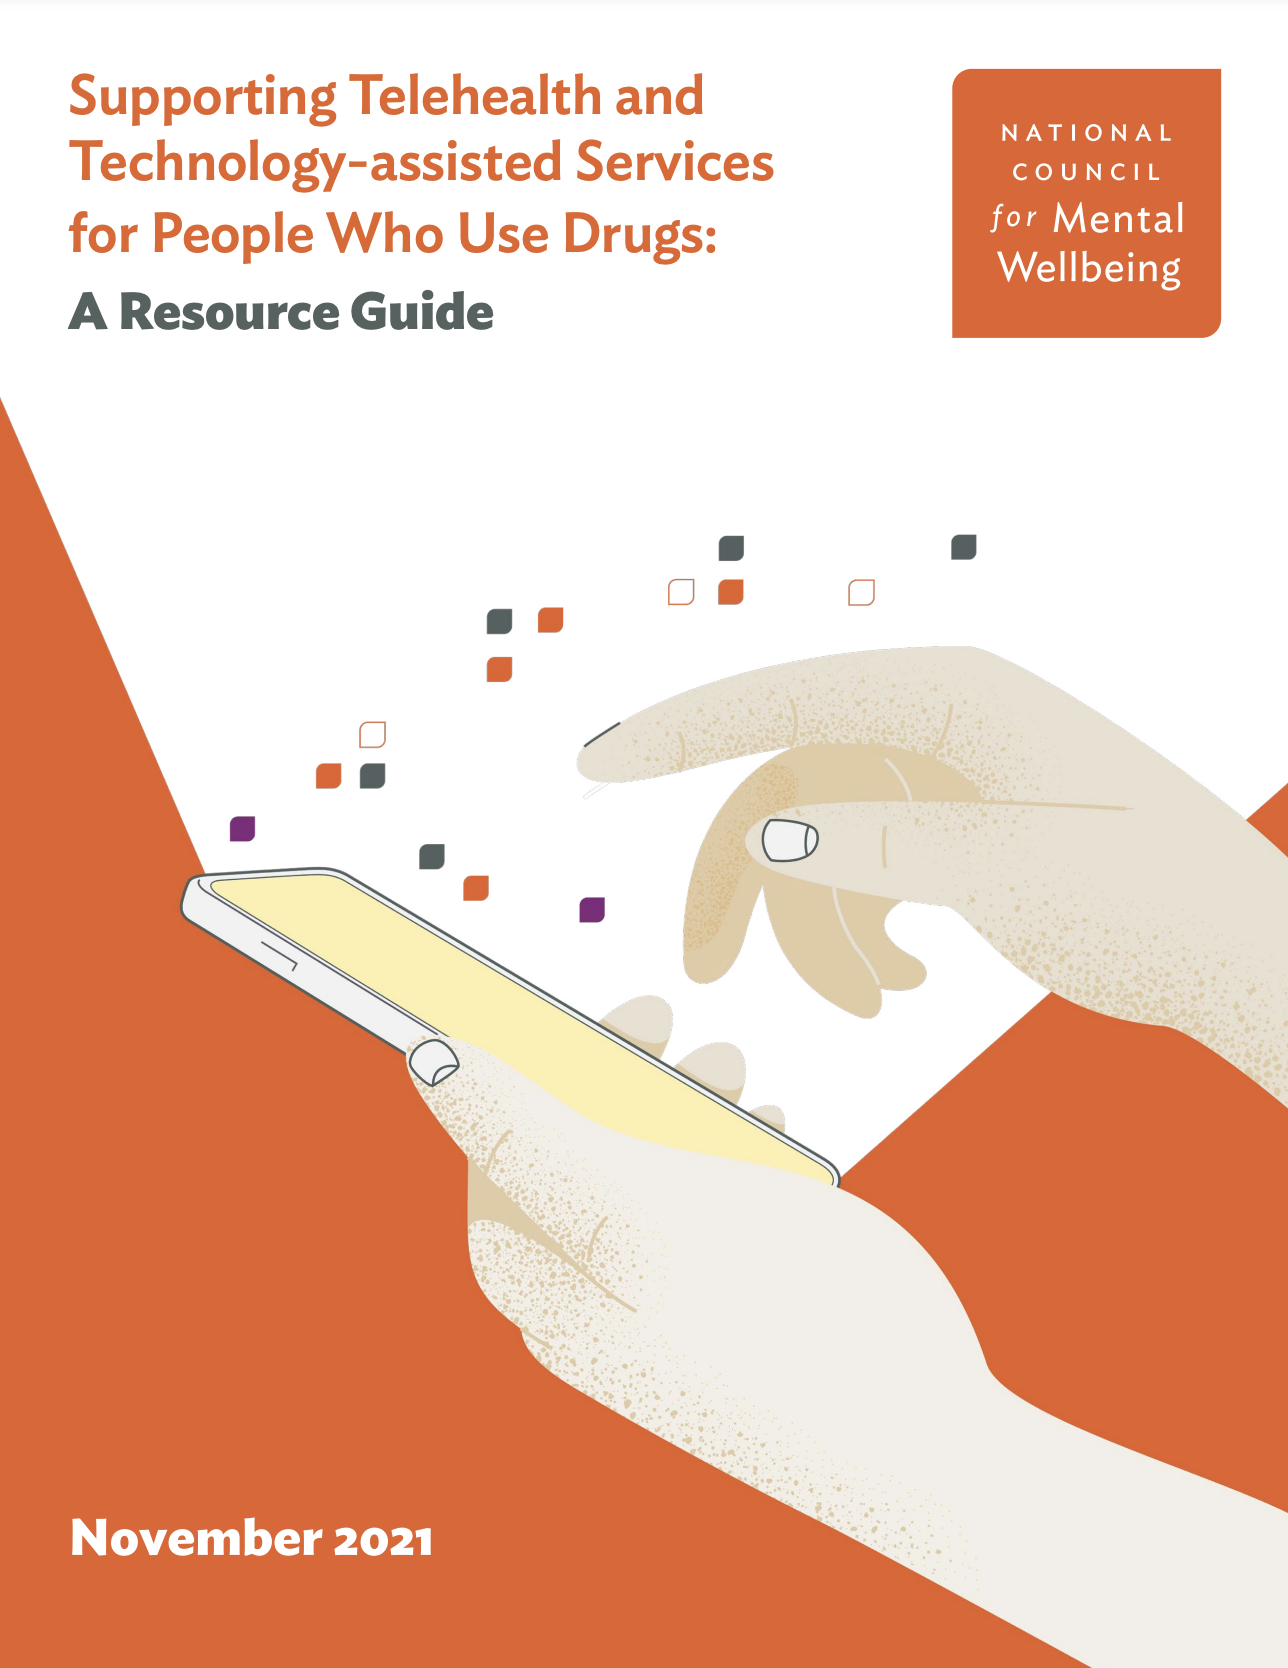 Supporting Telehealth and Technology-assisted Services for People Who Use Drugs: A Resource Guide